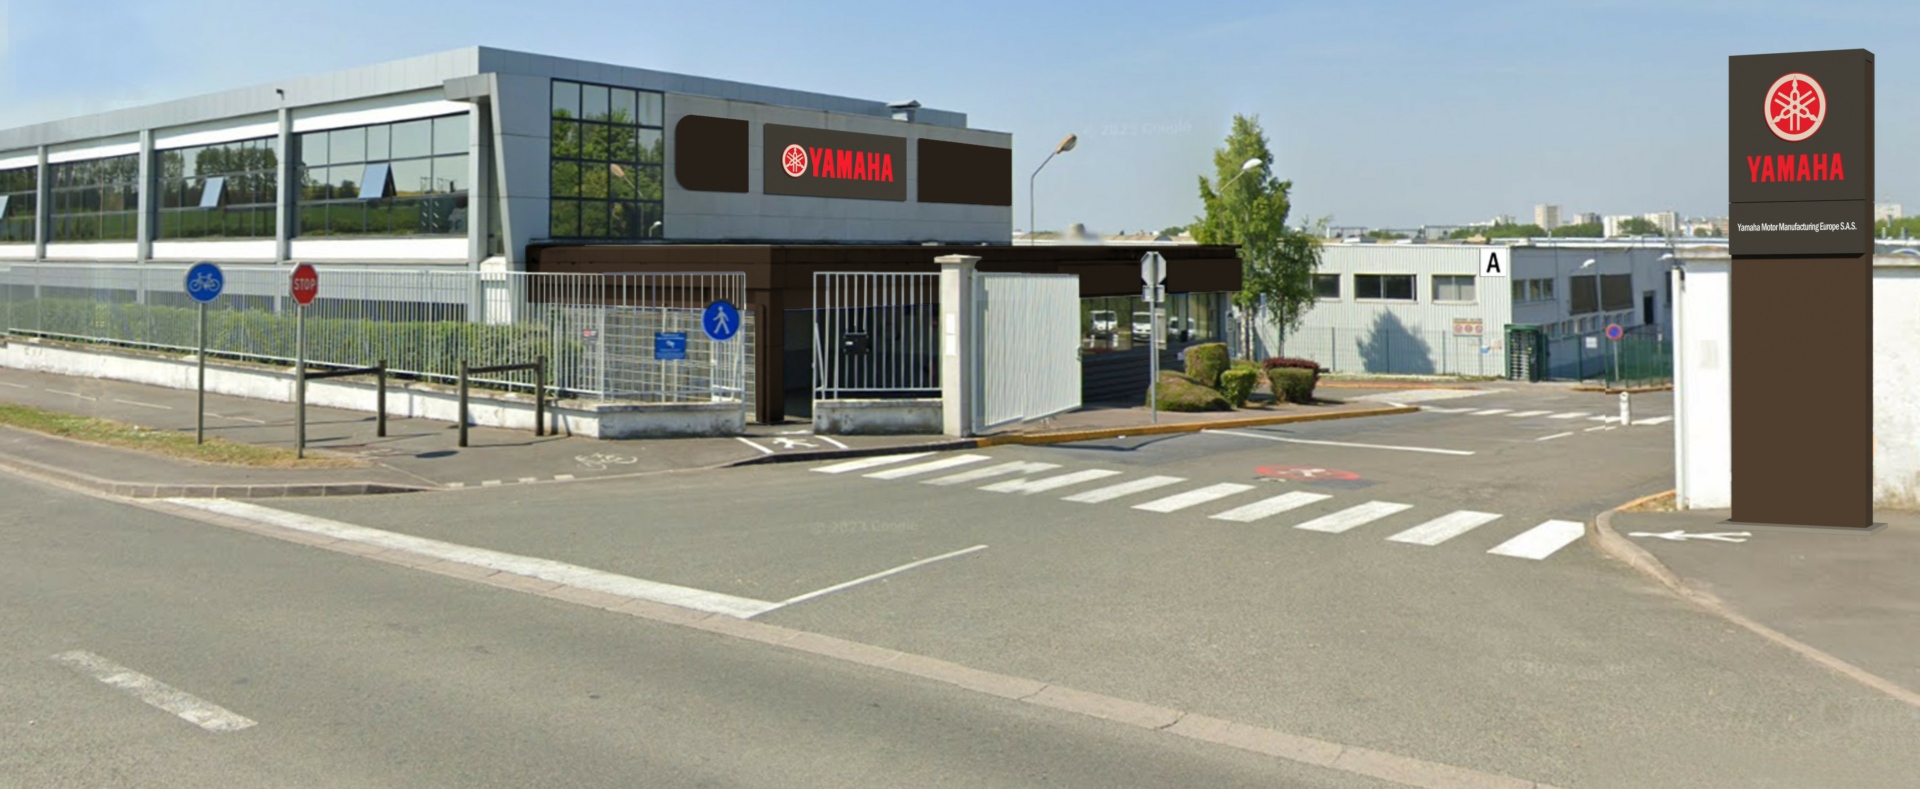 Yamaha Motor Manufacturing Europe S.A.S., formerly known as MBK Industrie S.A.S. (MBK), in Saint Quentin, France. Photo courtesy Yamaha Motor Europe.